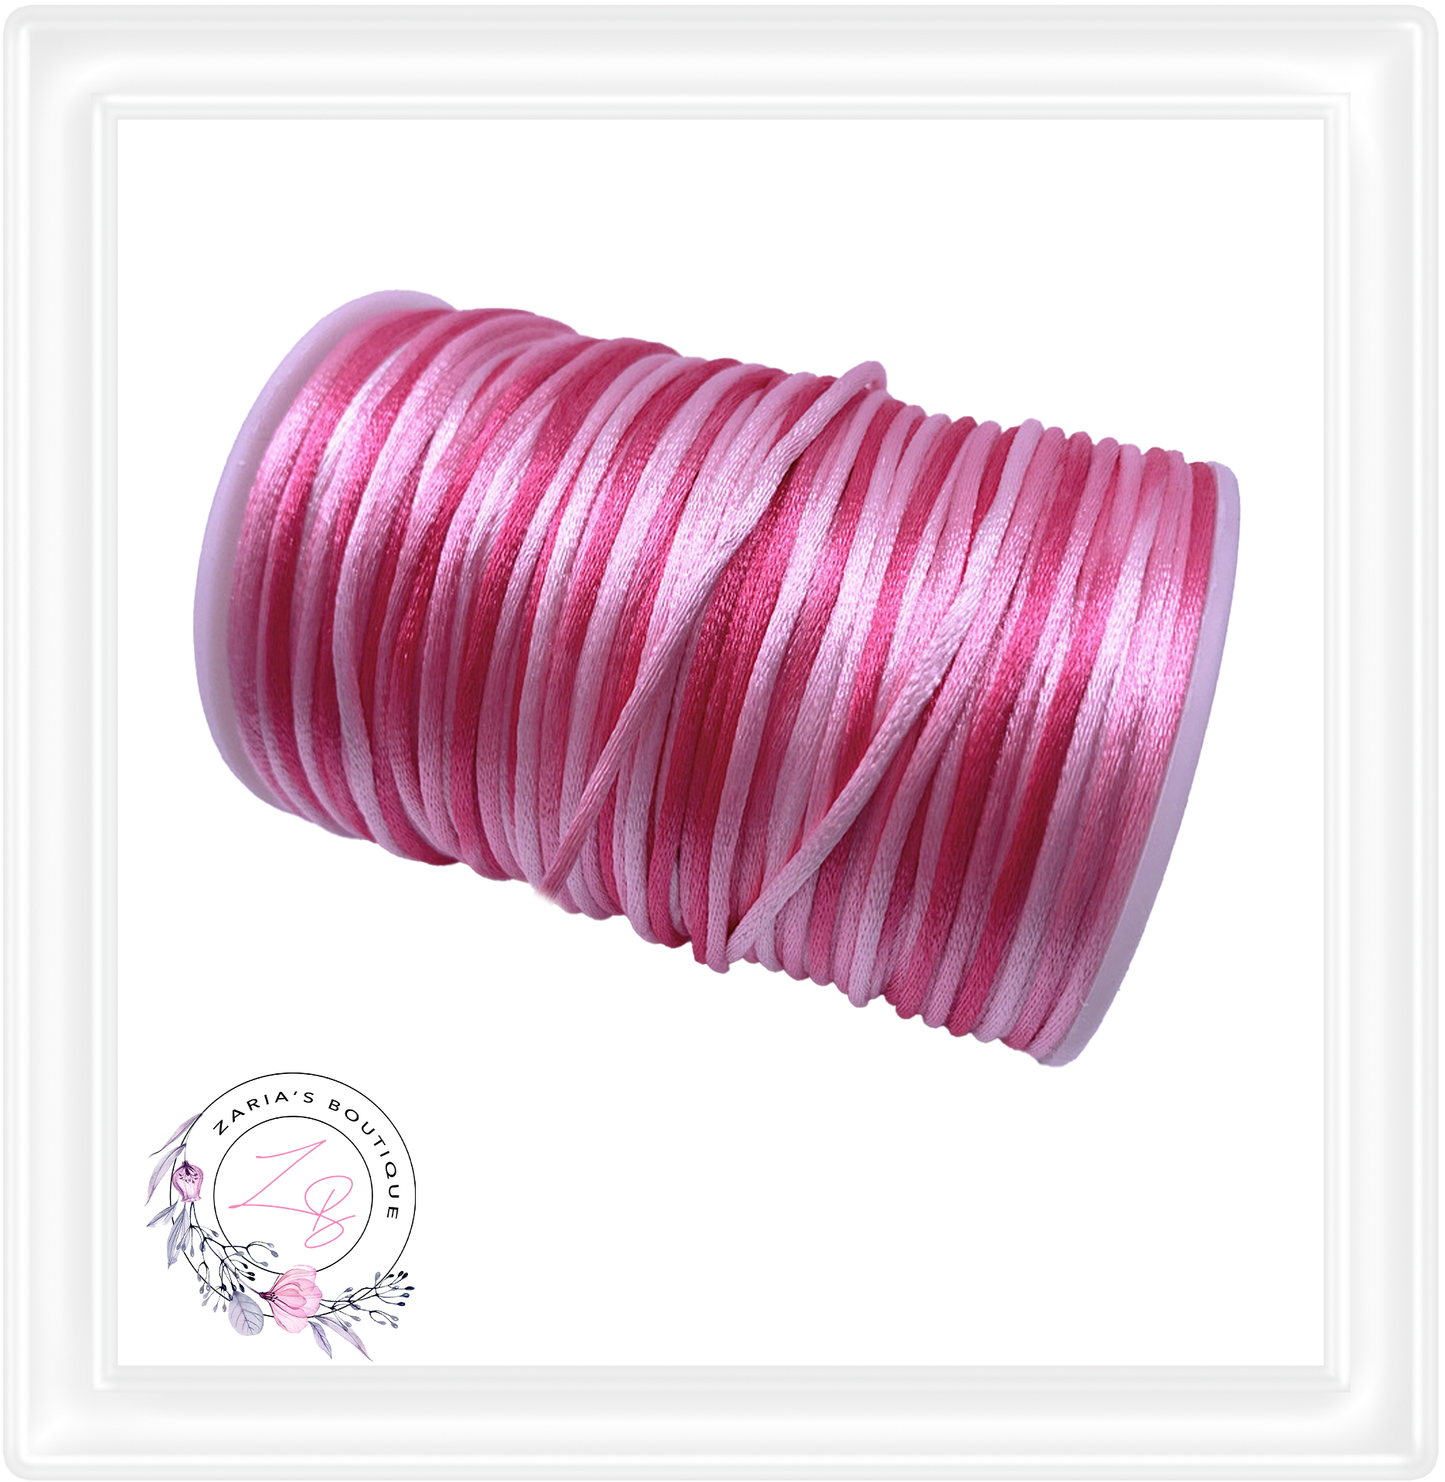 ⋅ Silky Satin Cord ⋅ Ombre Bright Pinks ⋅ 2.0mm ⋅ 5 yards ⋅